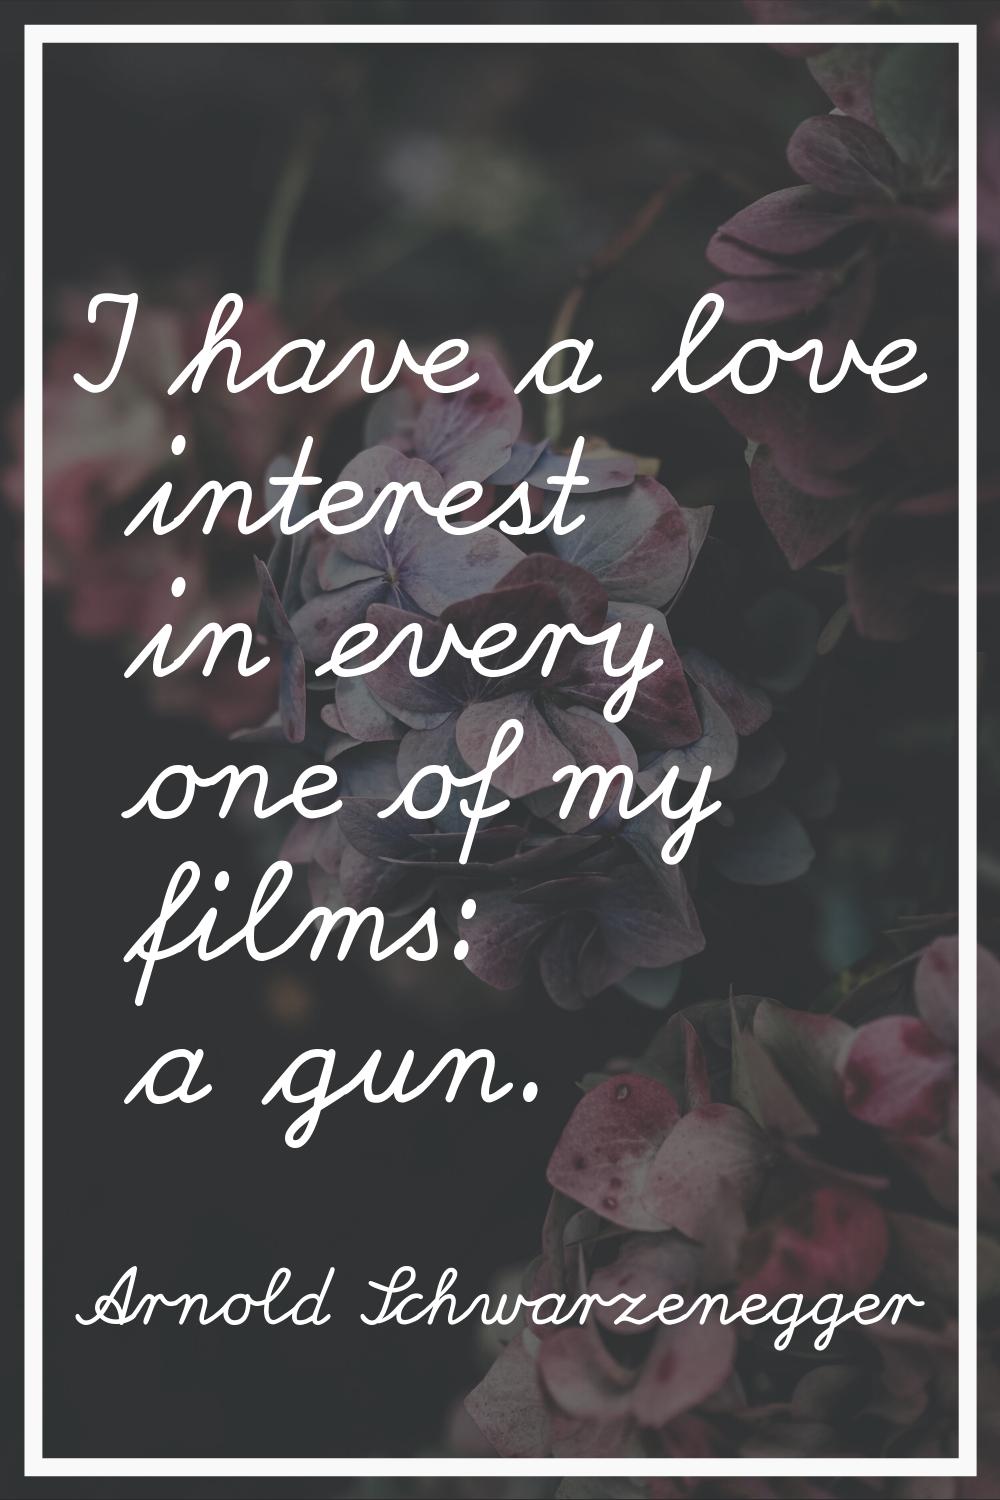 I have a love interest in every one of my films: a gun.